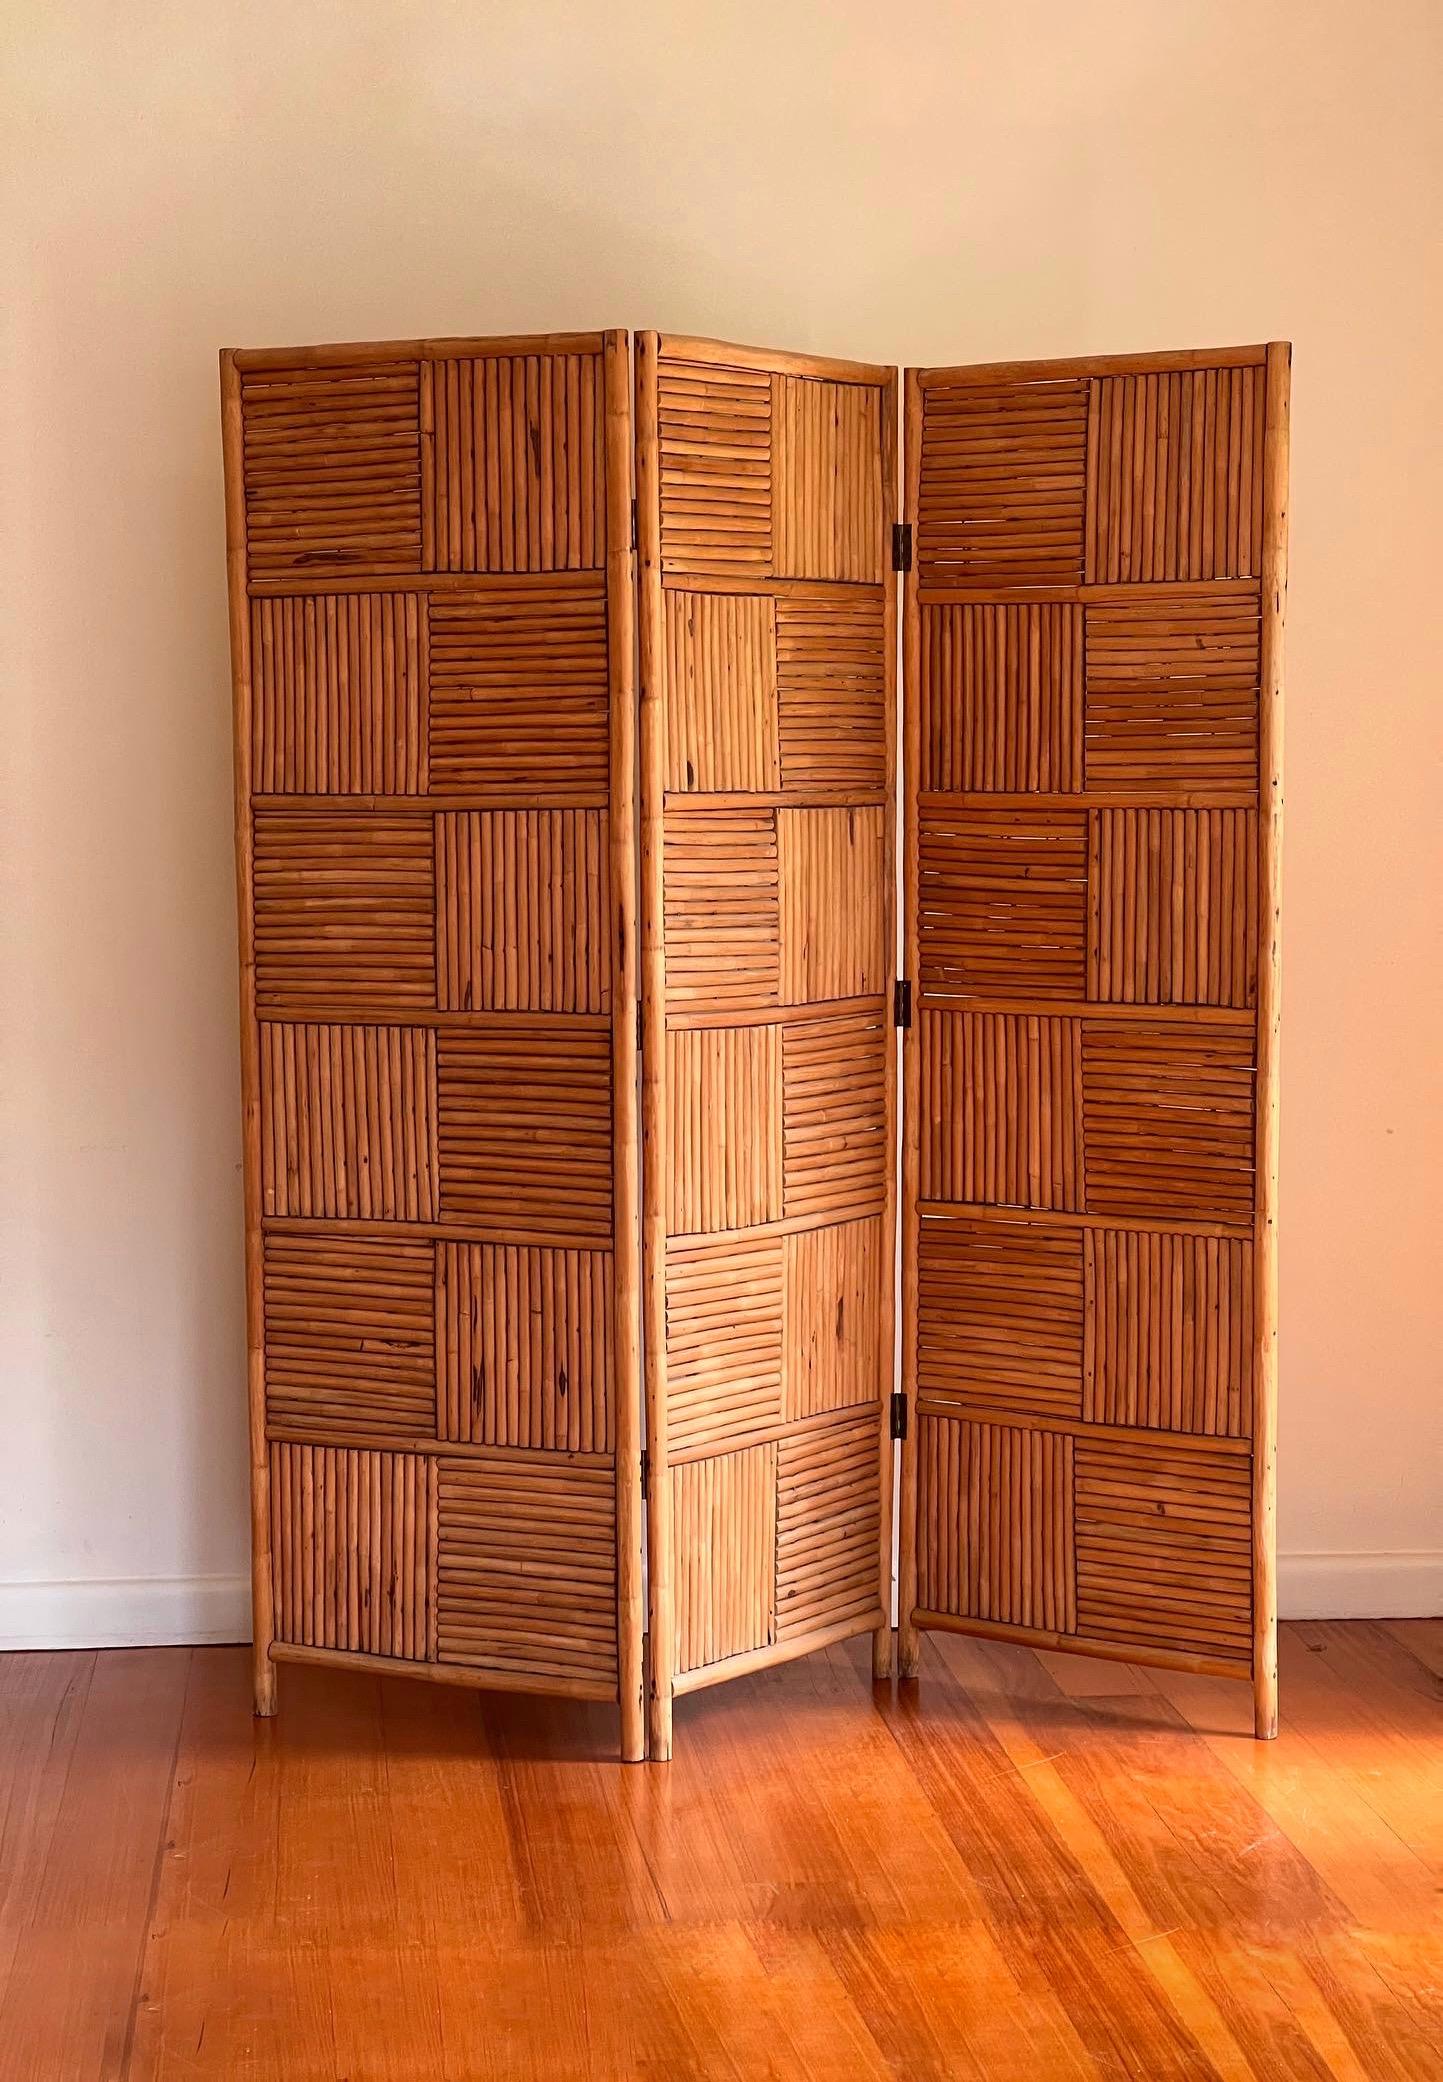 Add a touch of vintage charm to your space with this exquisite Vintage Italian Cane Screen from the 1970s. Handmade with meticulous artistry, this bamboo cane privacy screen room divider features a stacked three-panel design adorned with a